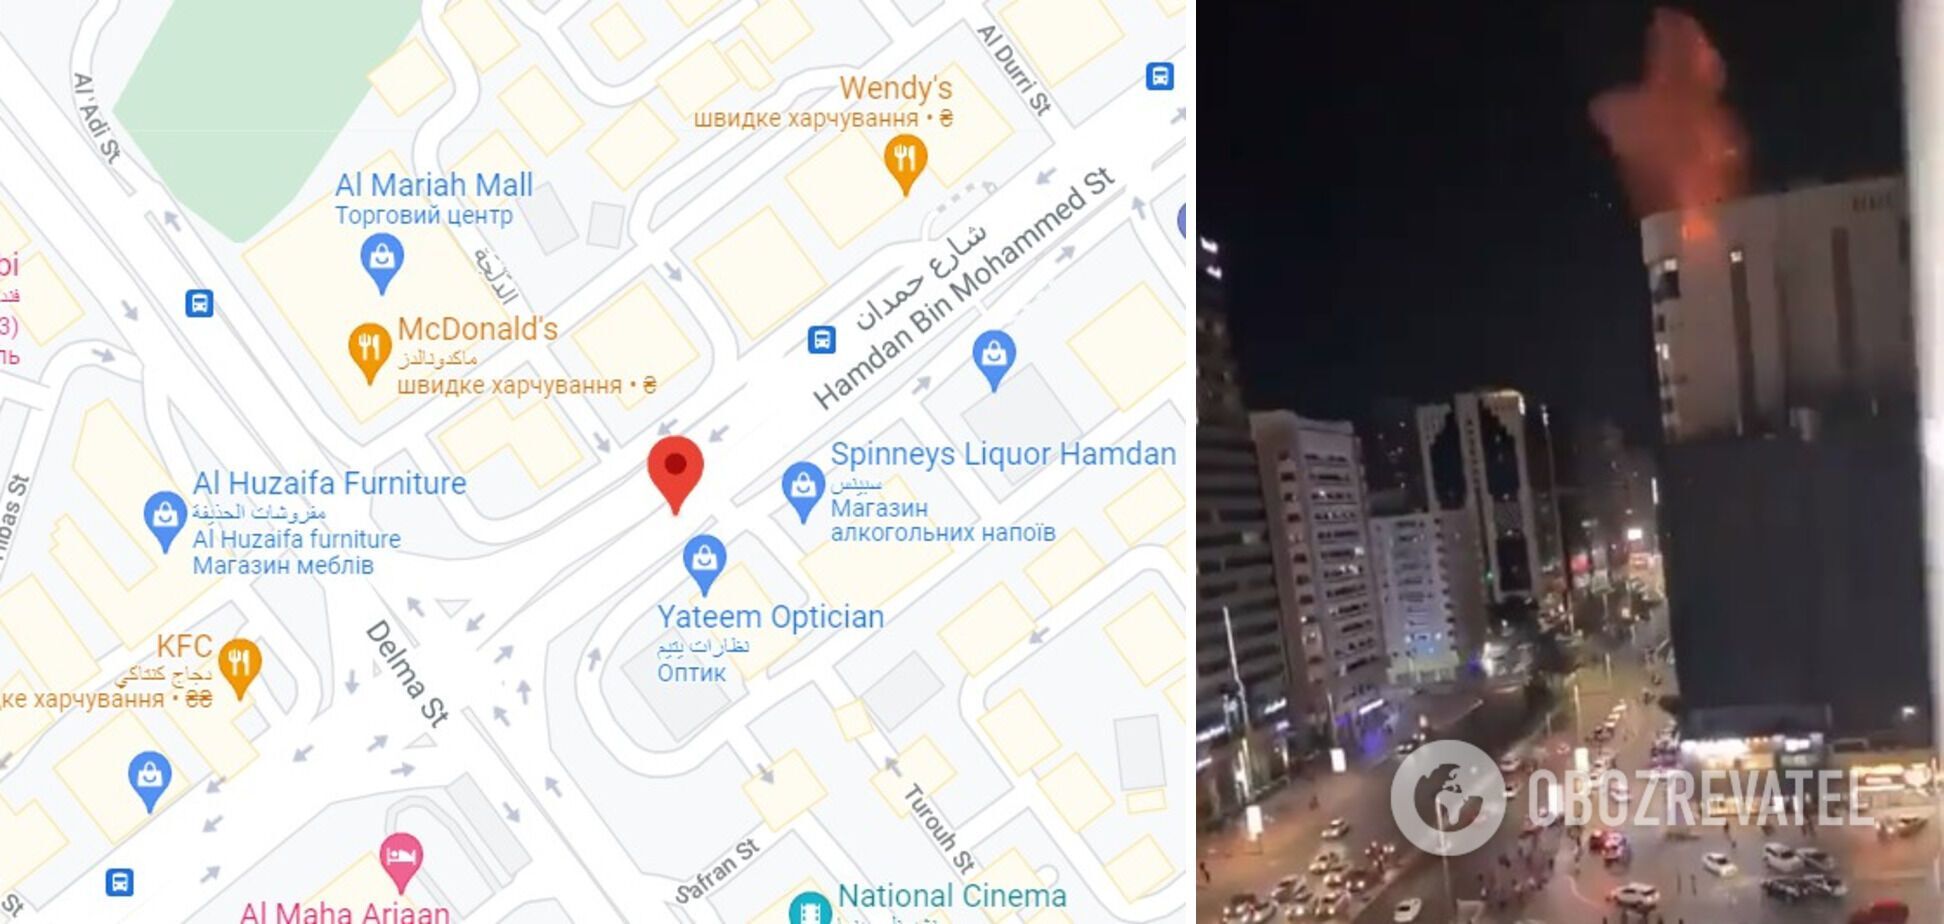 The incident occurred at the intersection of Hamdan and Delma streets